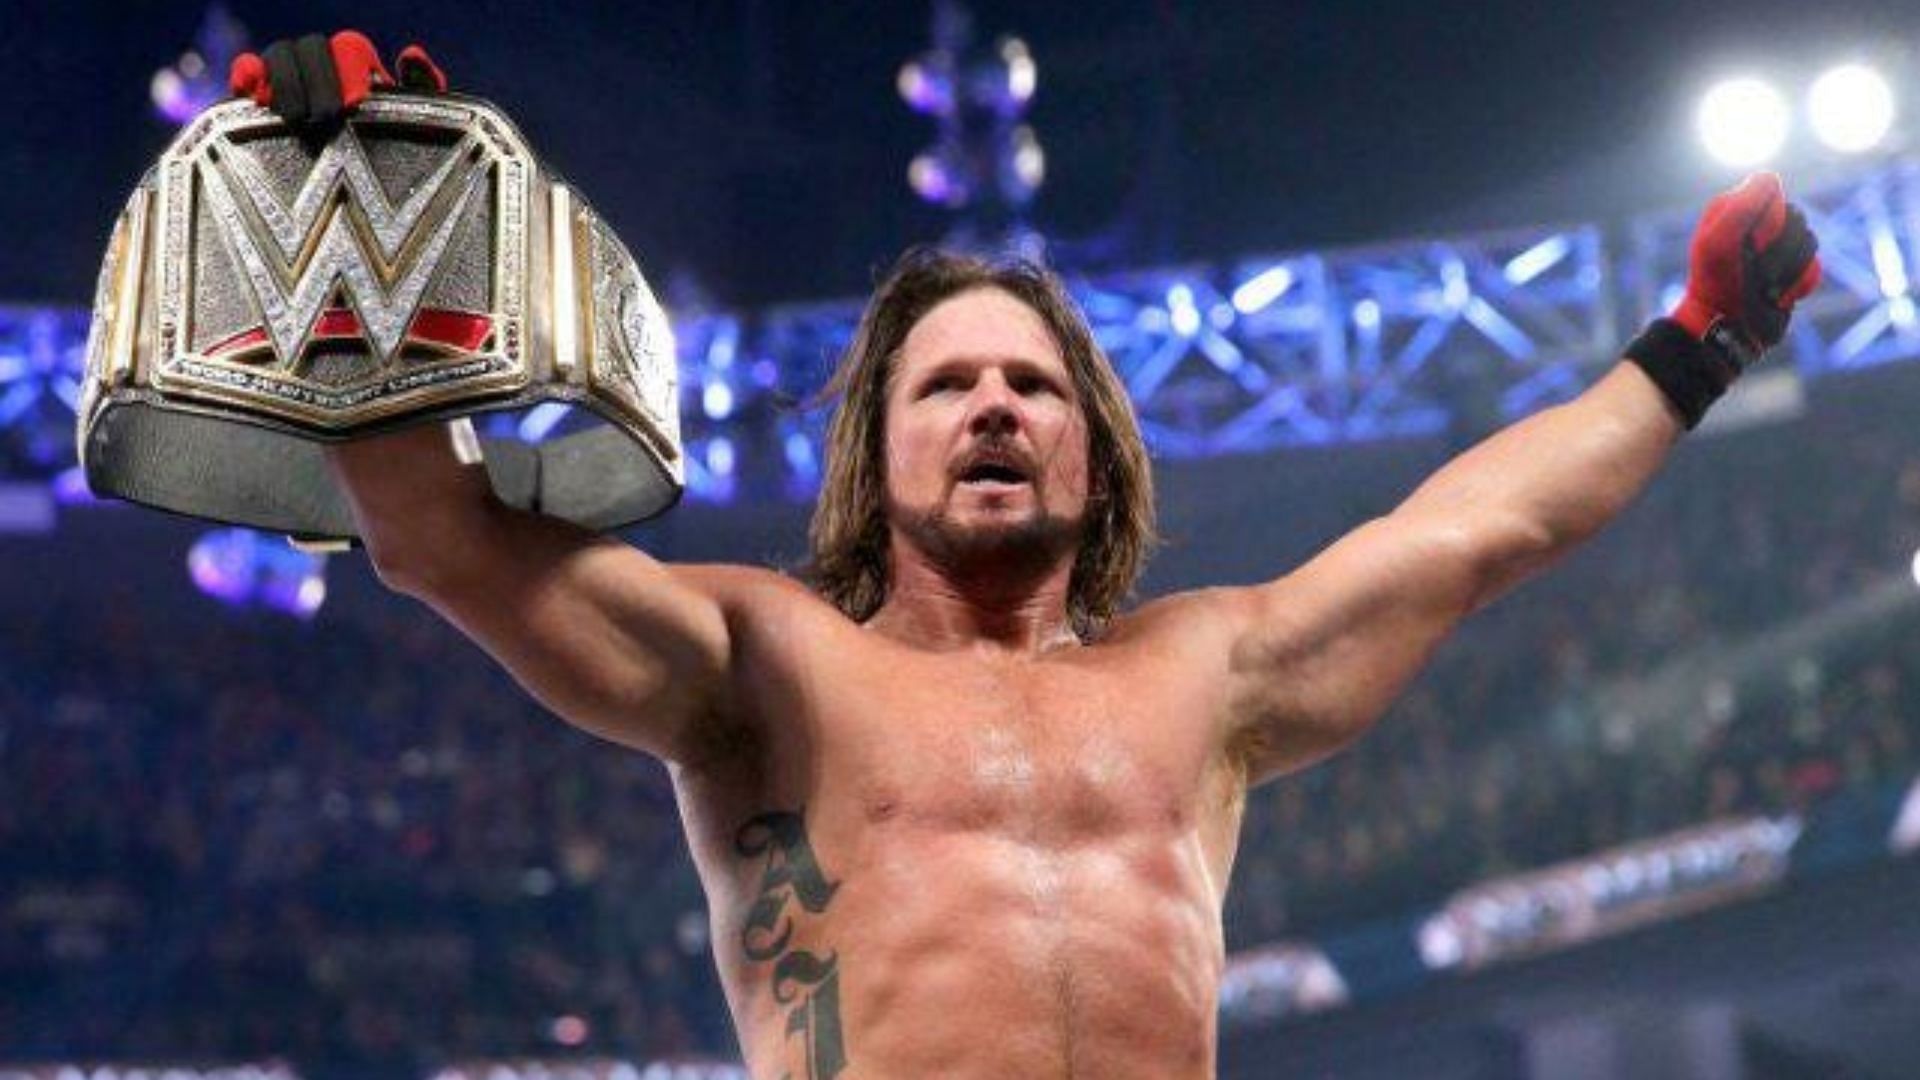 AJ Styles is a former two-time WWE Champion